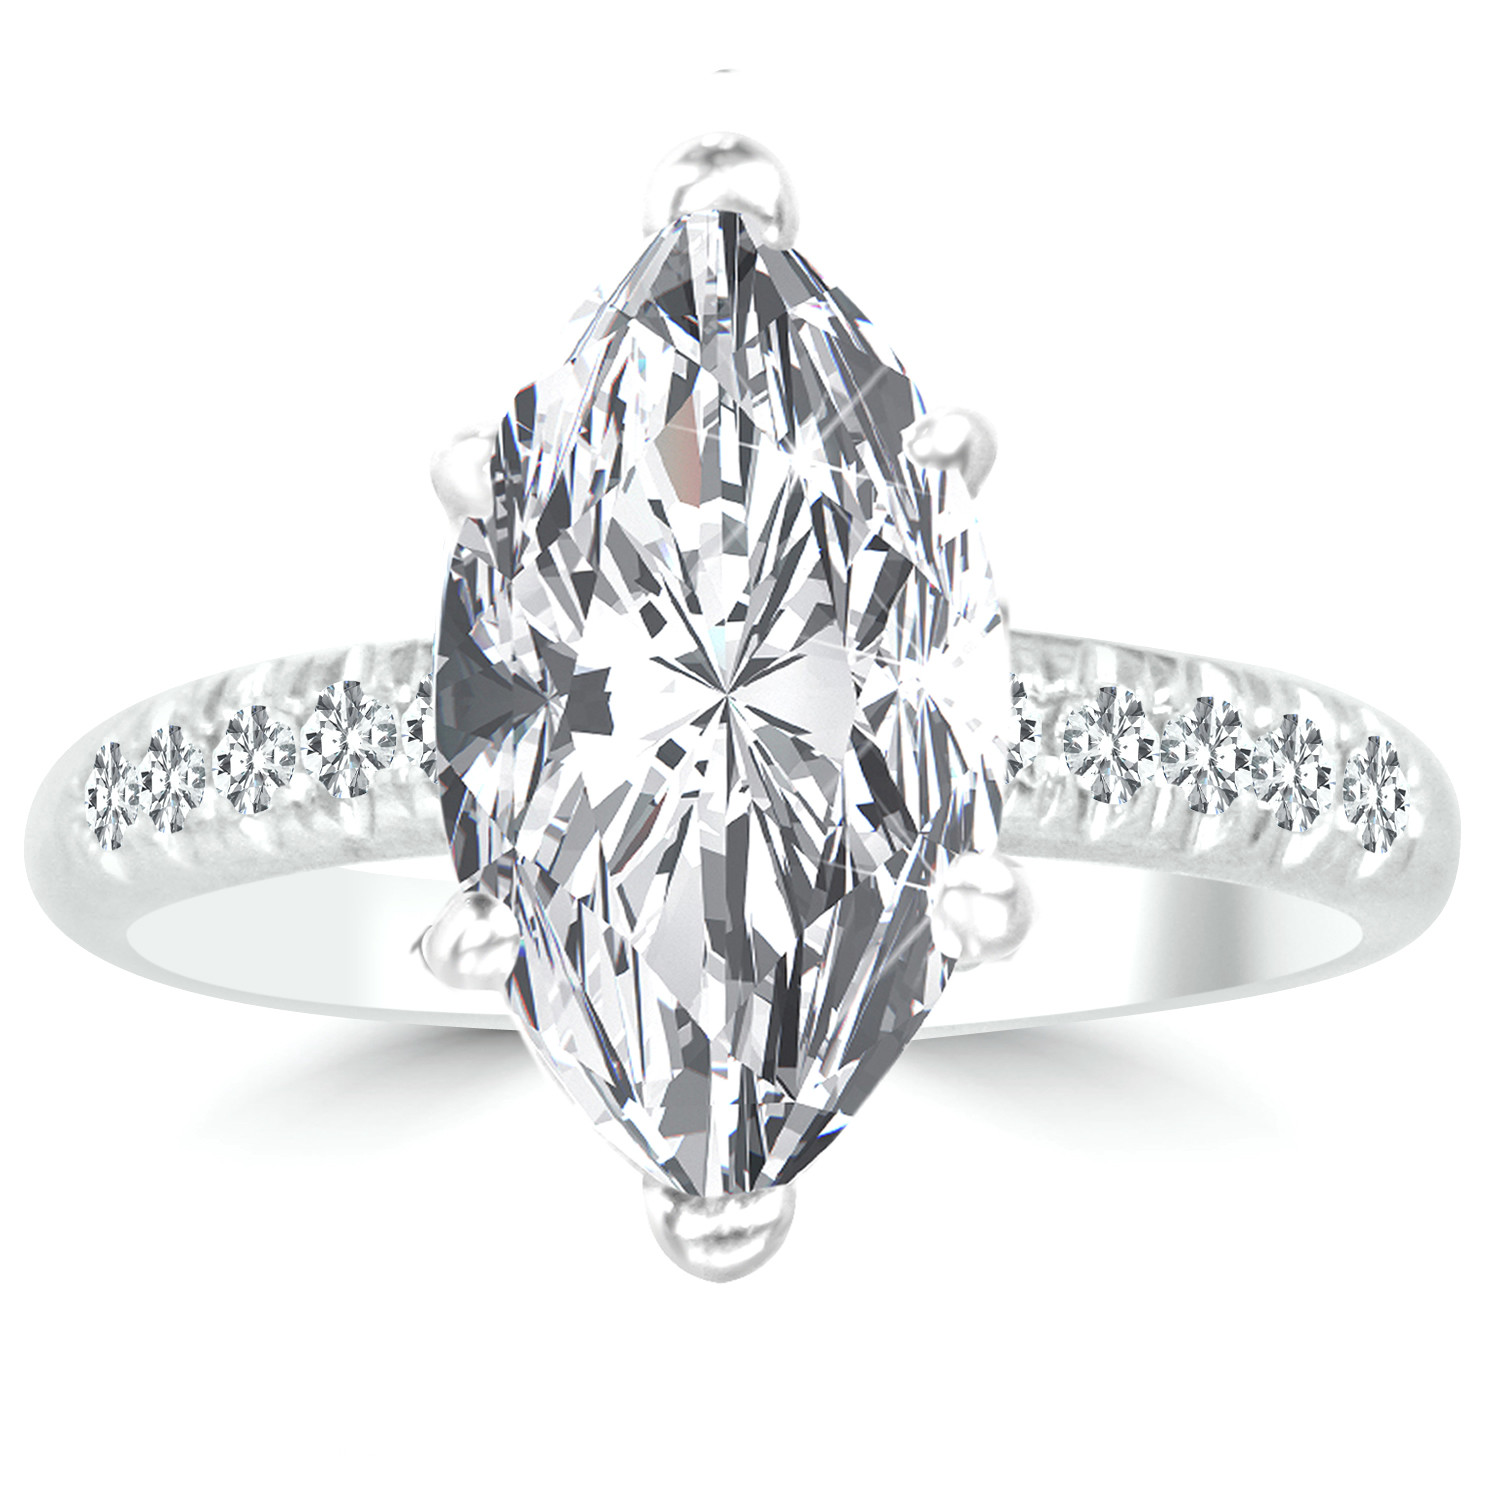 Marquise Diamond Engagement Rings
 2 23 Ct Marquise Cut Diamond Engagement Ring VS1 F 14K